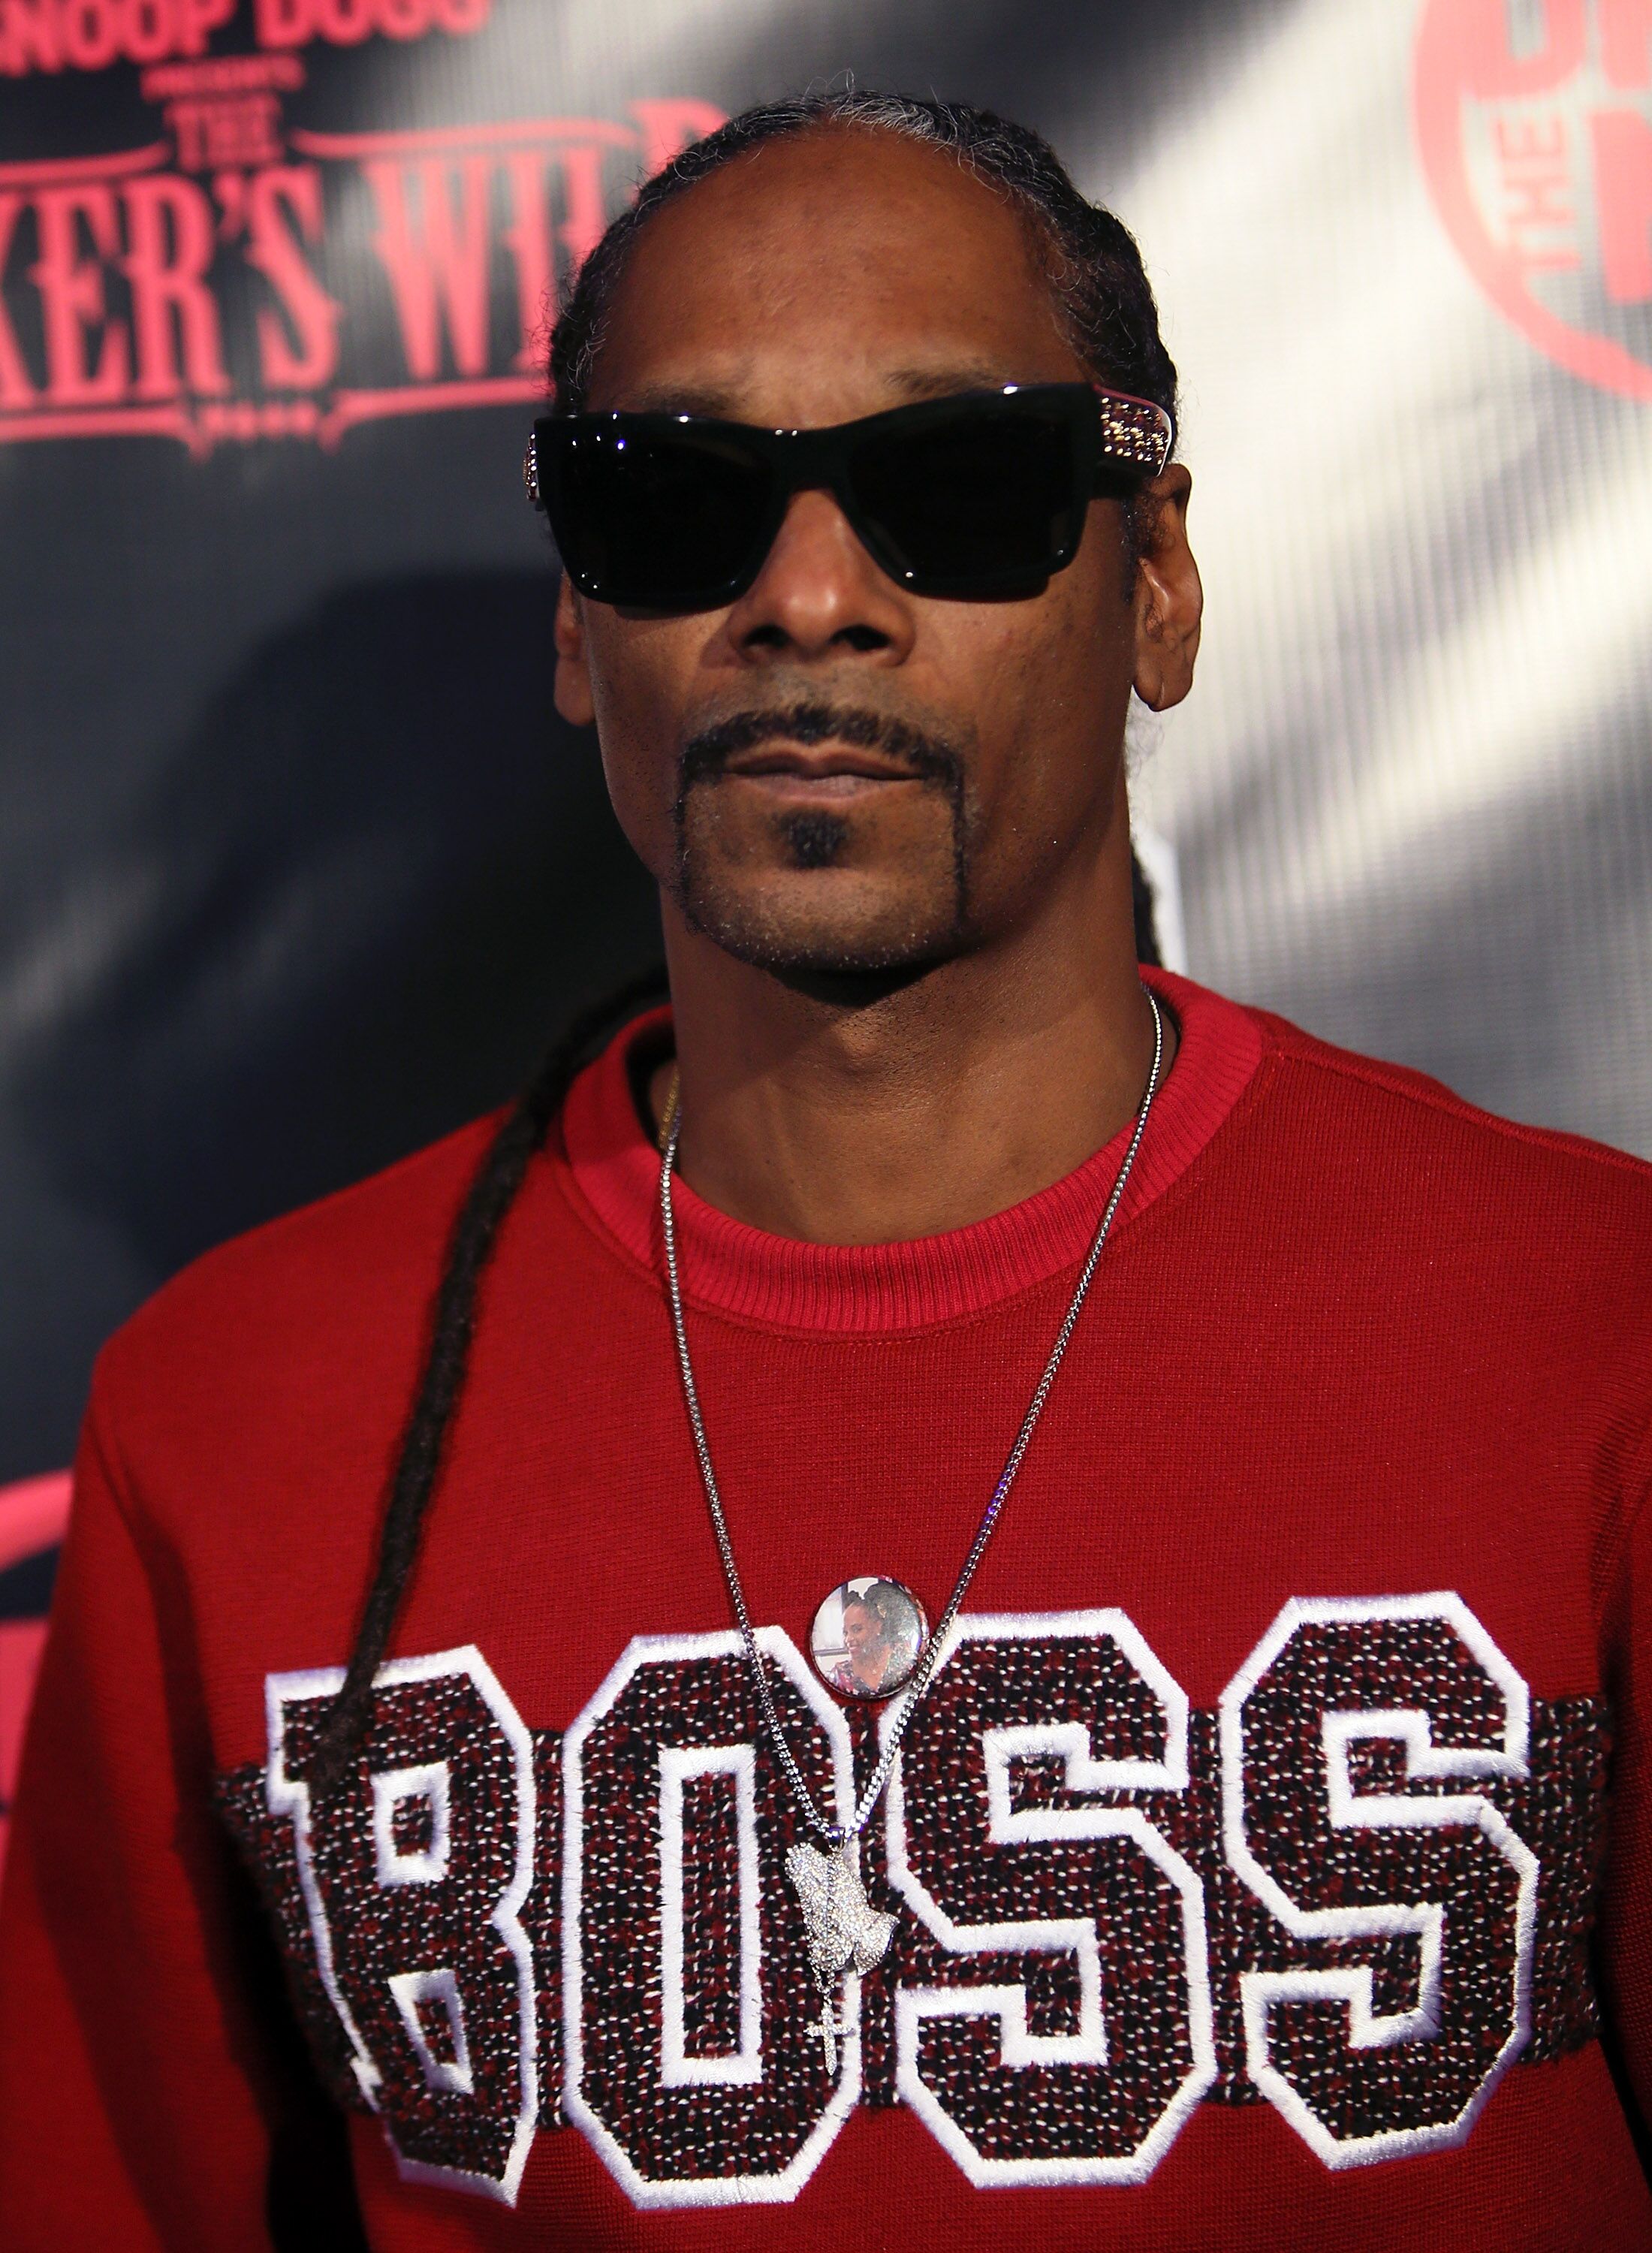 Rapper Snoop Dogg attends the premiere for TBS's "Drop The Mic" and "The Joker's Wild" at The Highlight Room on October 11, 2017 | Photo: Getty Images